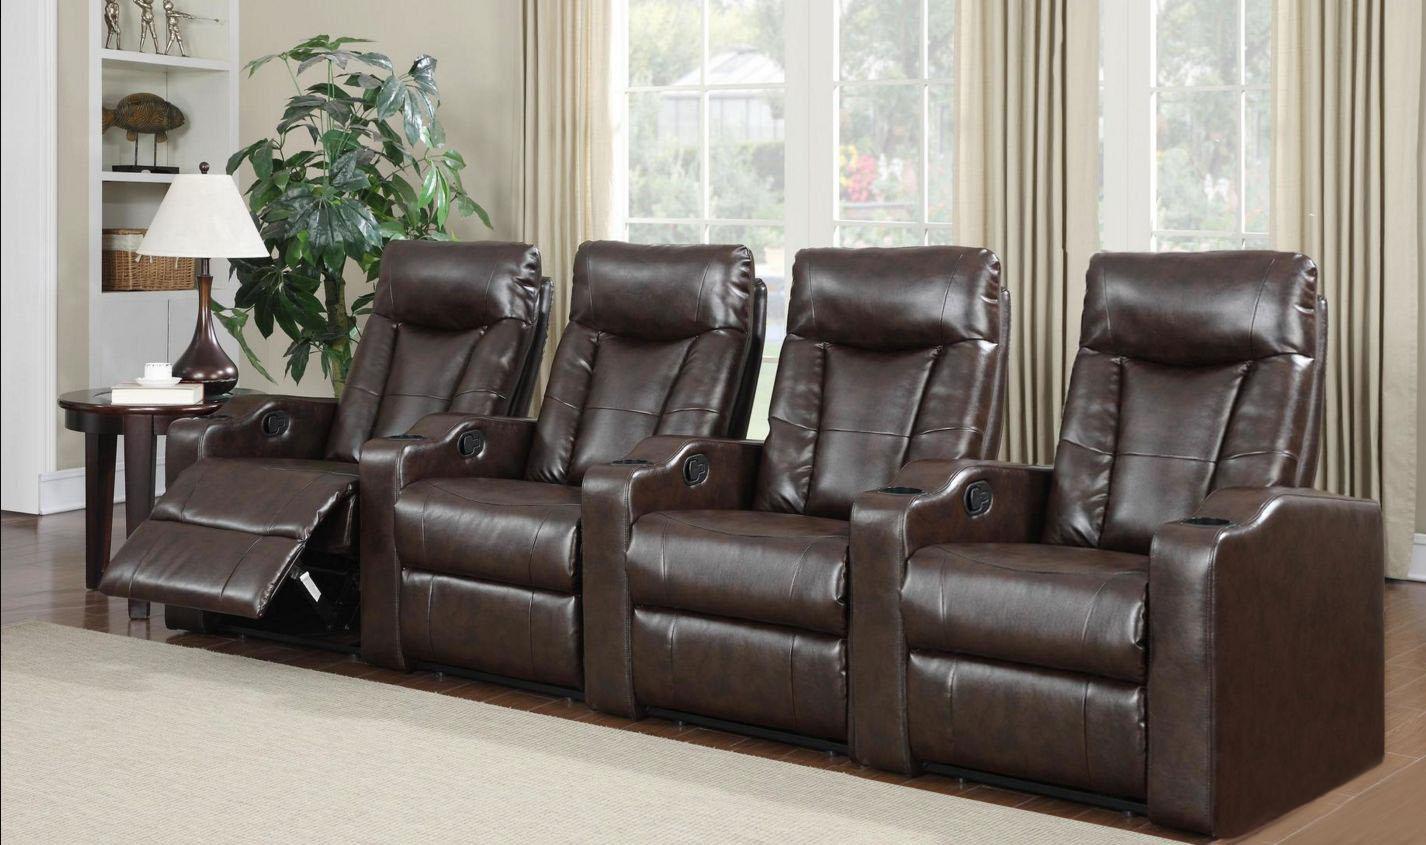 

    
MYCO Furniture Camden Brown Bonded Leather Reclining Home Theater 4 Seats w/Cupholders
